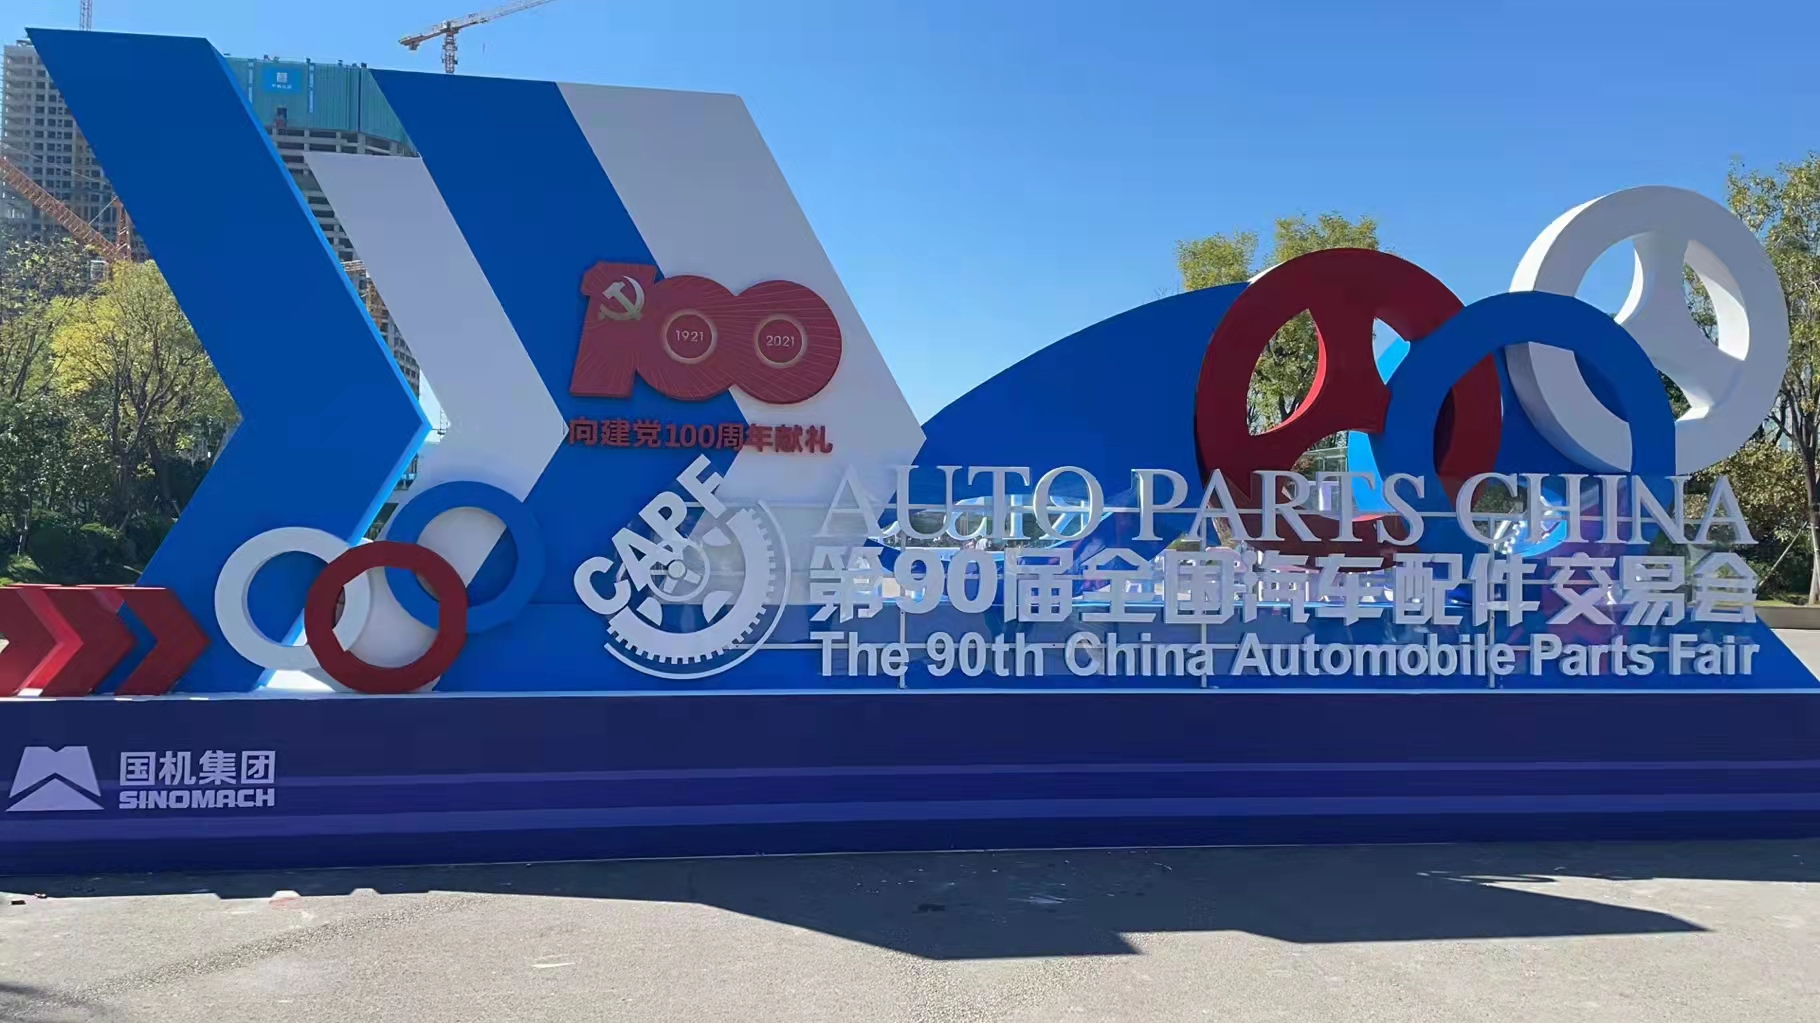 Under the stable epidemic situation in China, the 90th Auto Parts Fair (Jinan, China) was successfully held